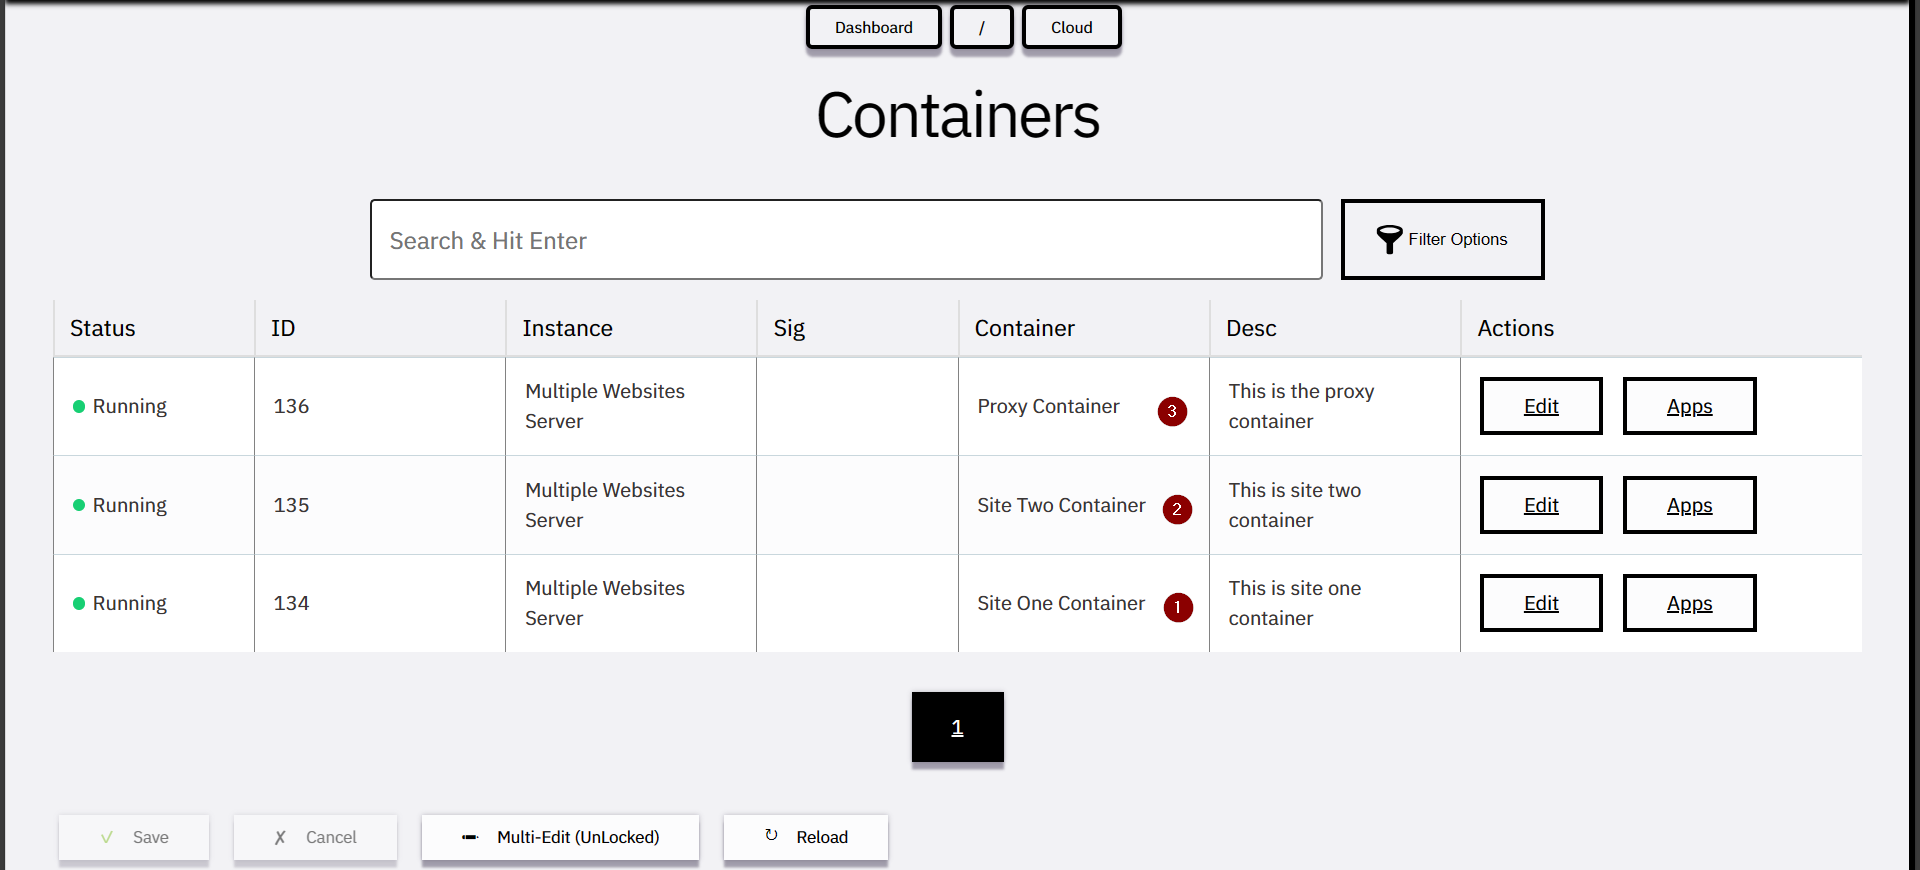 All containers in running state